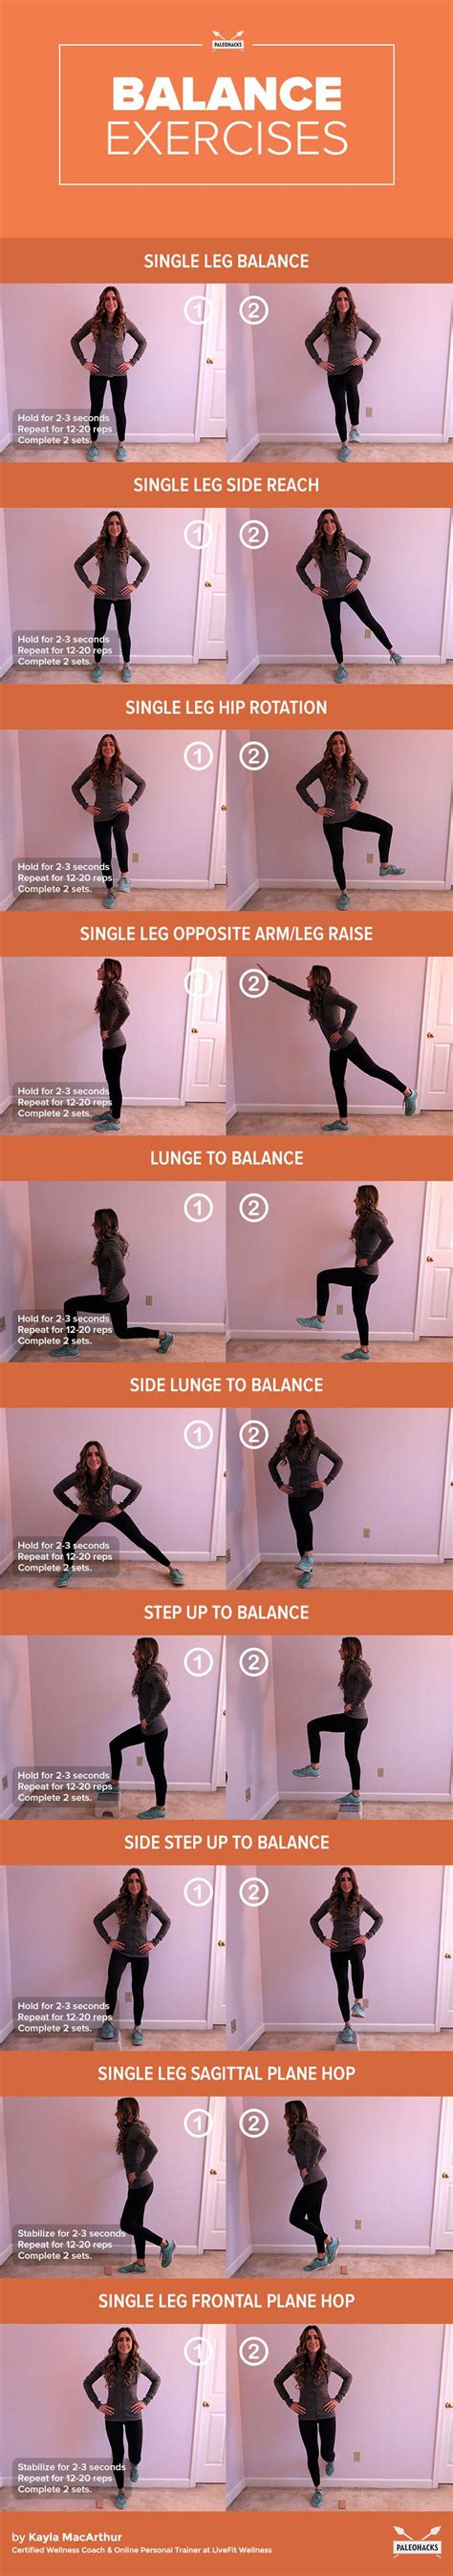 10 Balance Exercises To Help You Master All Workouts